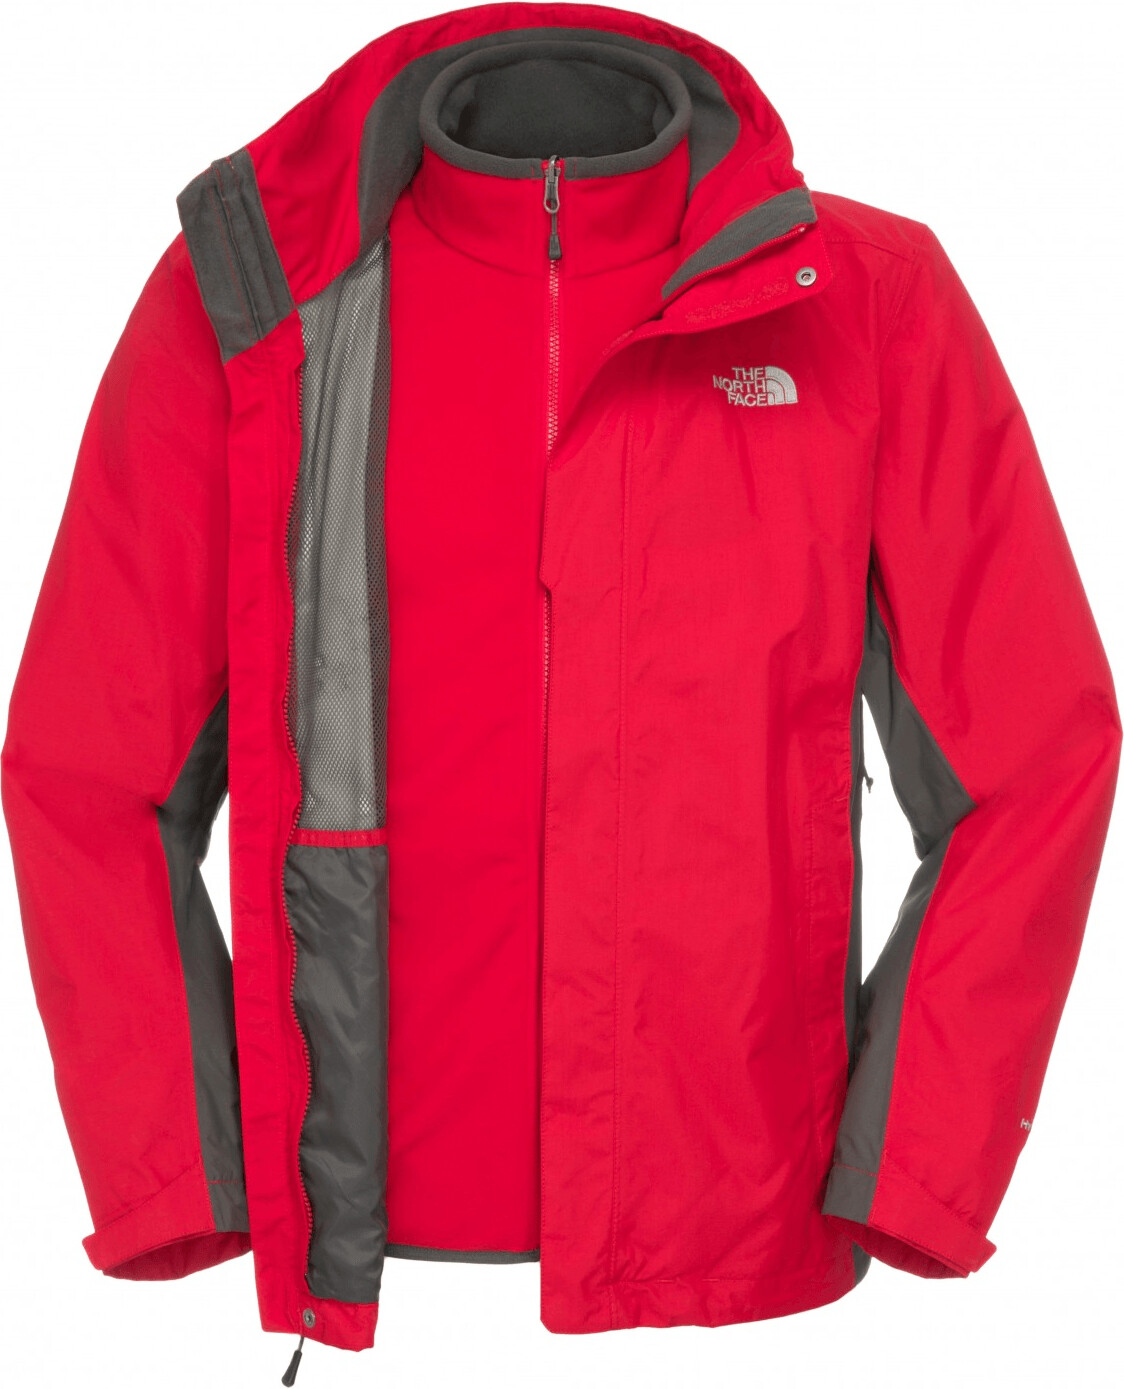 north face 2 in 1 jacket